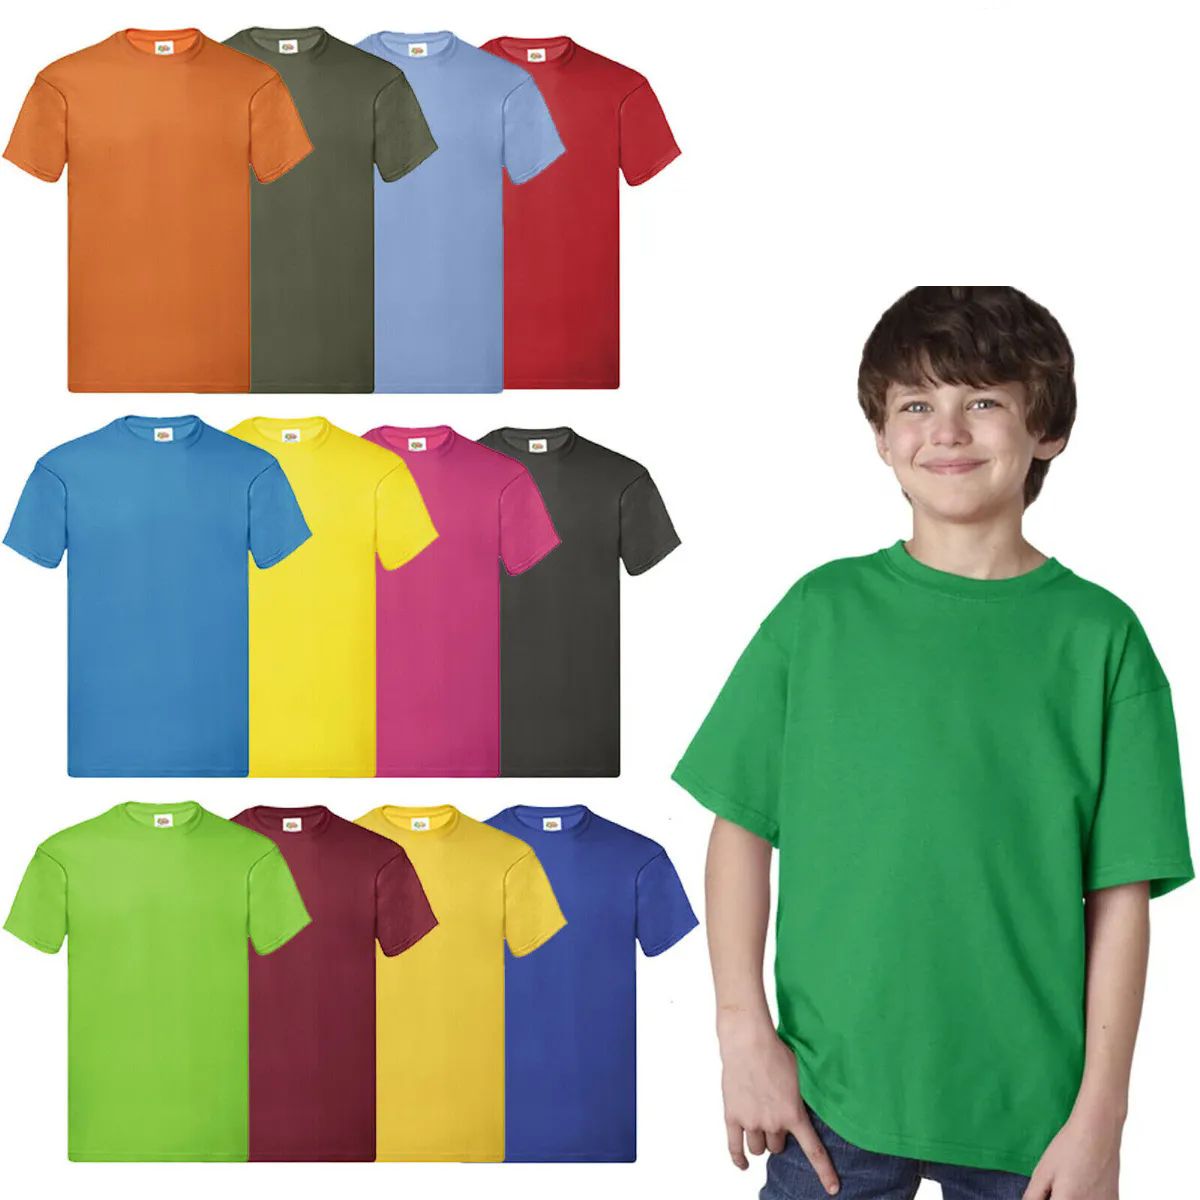 360 Pieces of Billion Hats Kids Youth Cotton Assorted Colors T Shirts Size XL